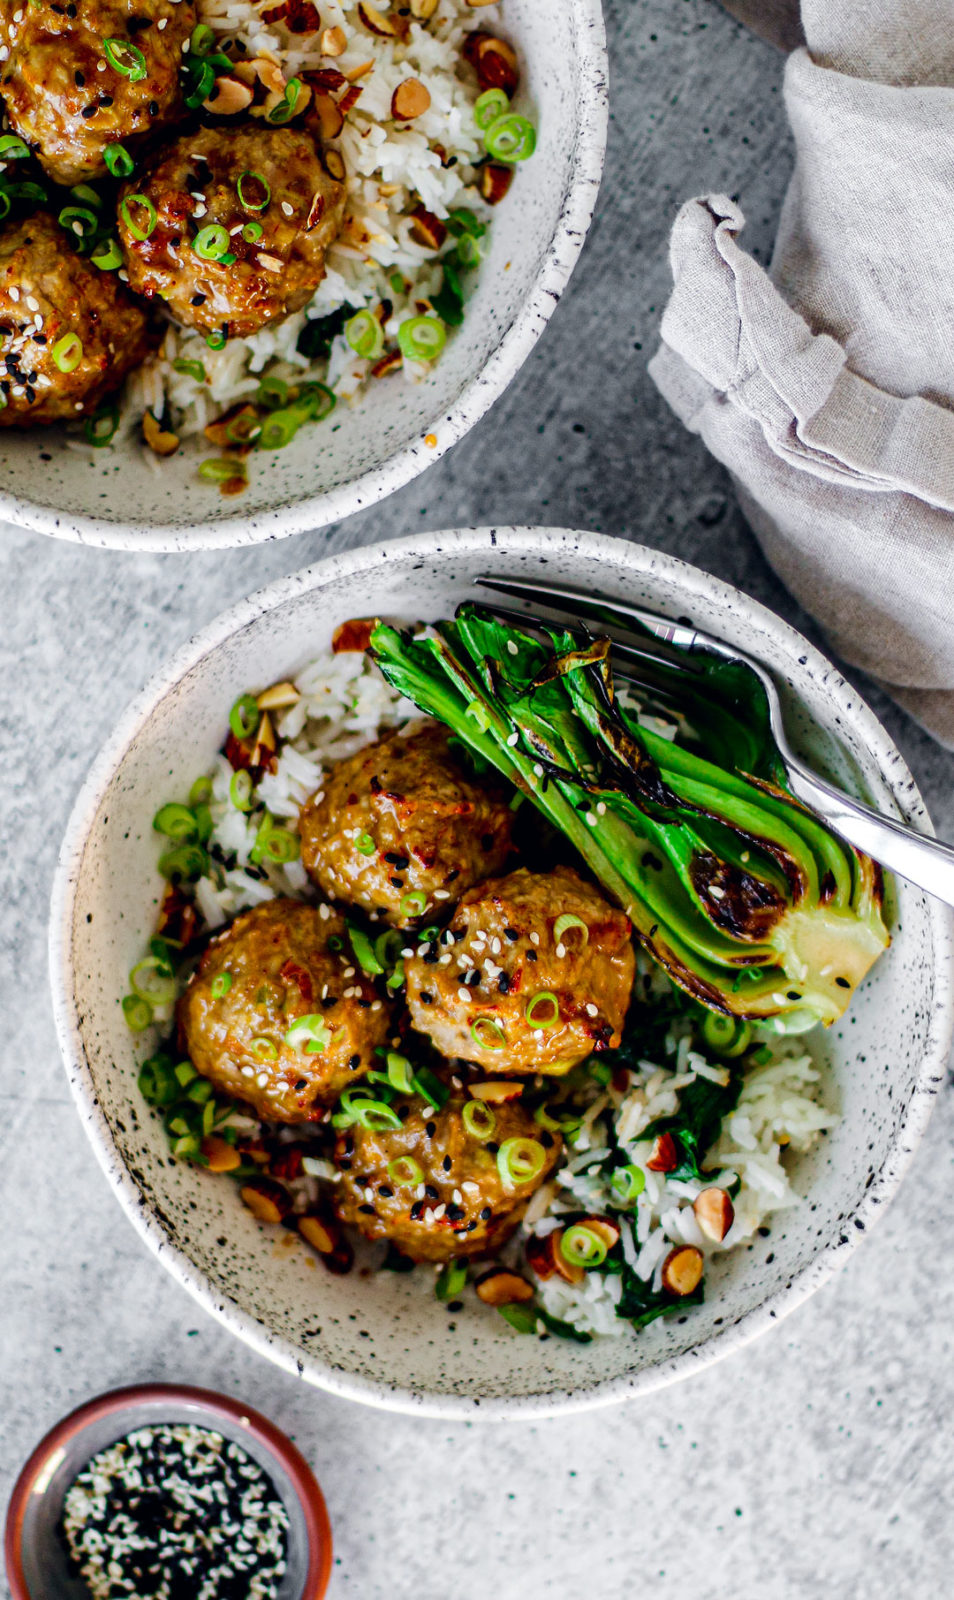 Bowls of garlic and ginger turkey meatballs over rice.